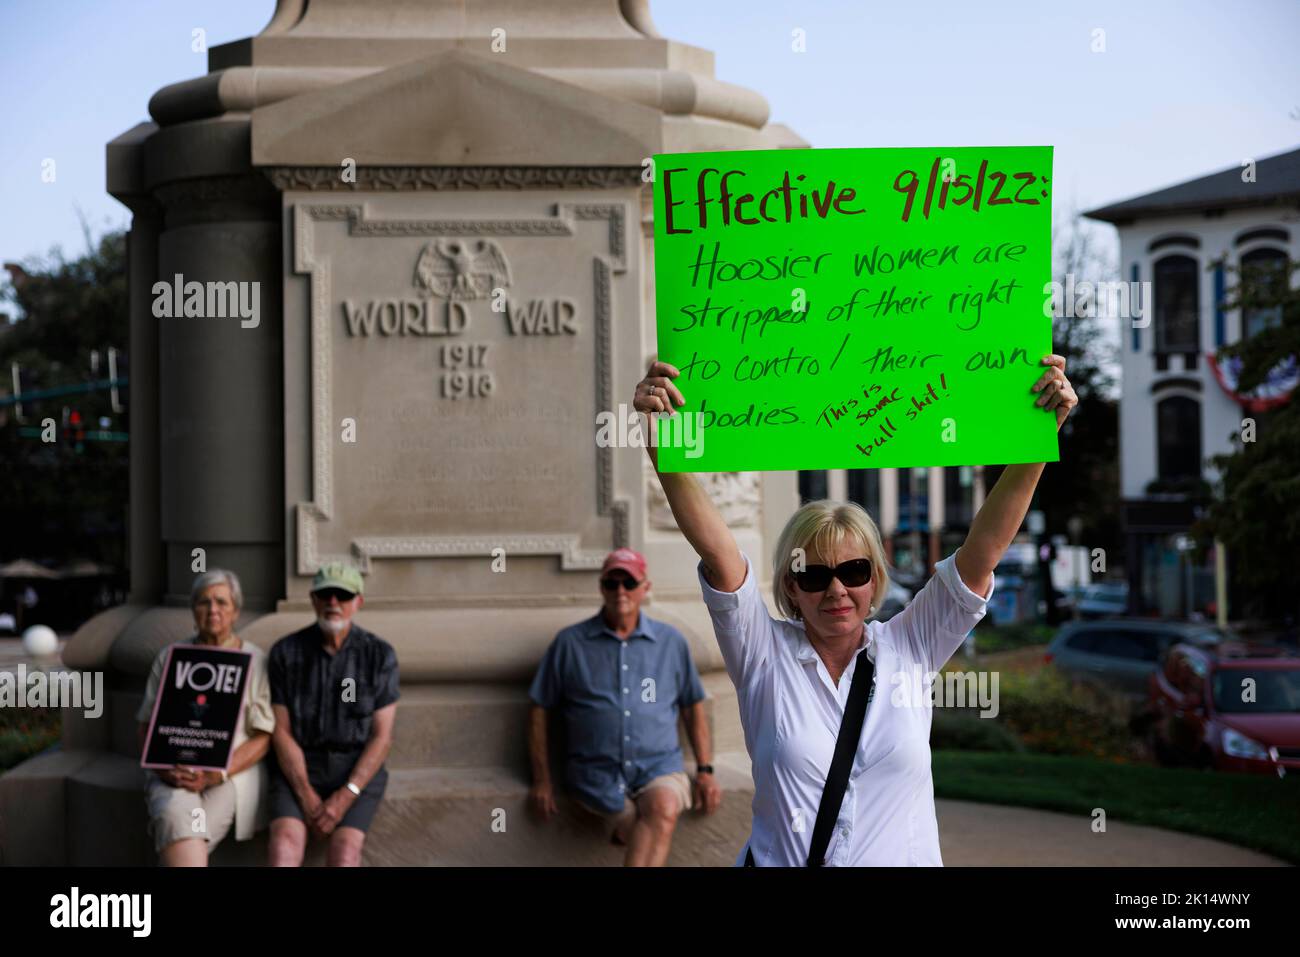 BLOOMINGTON, INDIANA - SEPTEMBER 14: (EDITORS NOTE: Image contains profanity.) Abortion rights activist holds a sign reading, 'Effective 9/15/22 Hoosier women are stripped of their right to control their own babies (This is some bullsh*t)' at the Monroe County Courthouse during a protest vigil a few hours before Indiana’s near total abortion ban goes into effect, on September 14, 2022 in Bloomington, Indiana. The Indiana legislature passed a law August 5th banning abortion in most cases, and making Indiana the first state to pass such a law after the Supreme Court’s conservative majority stuck Stock Photo